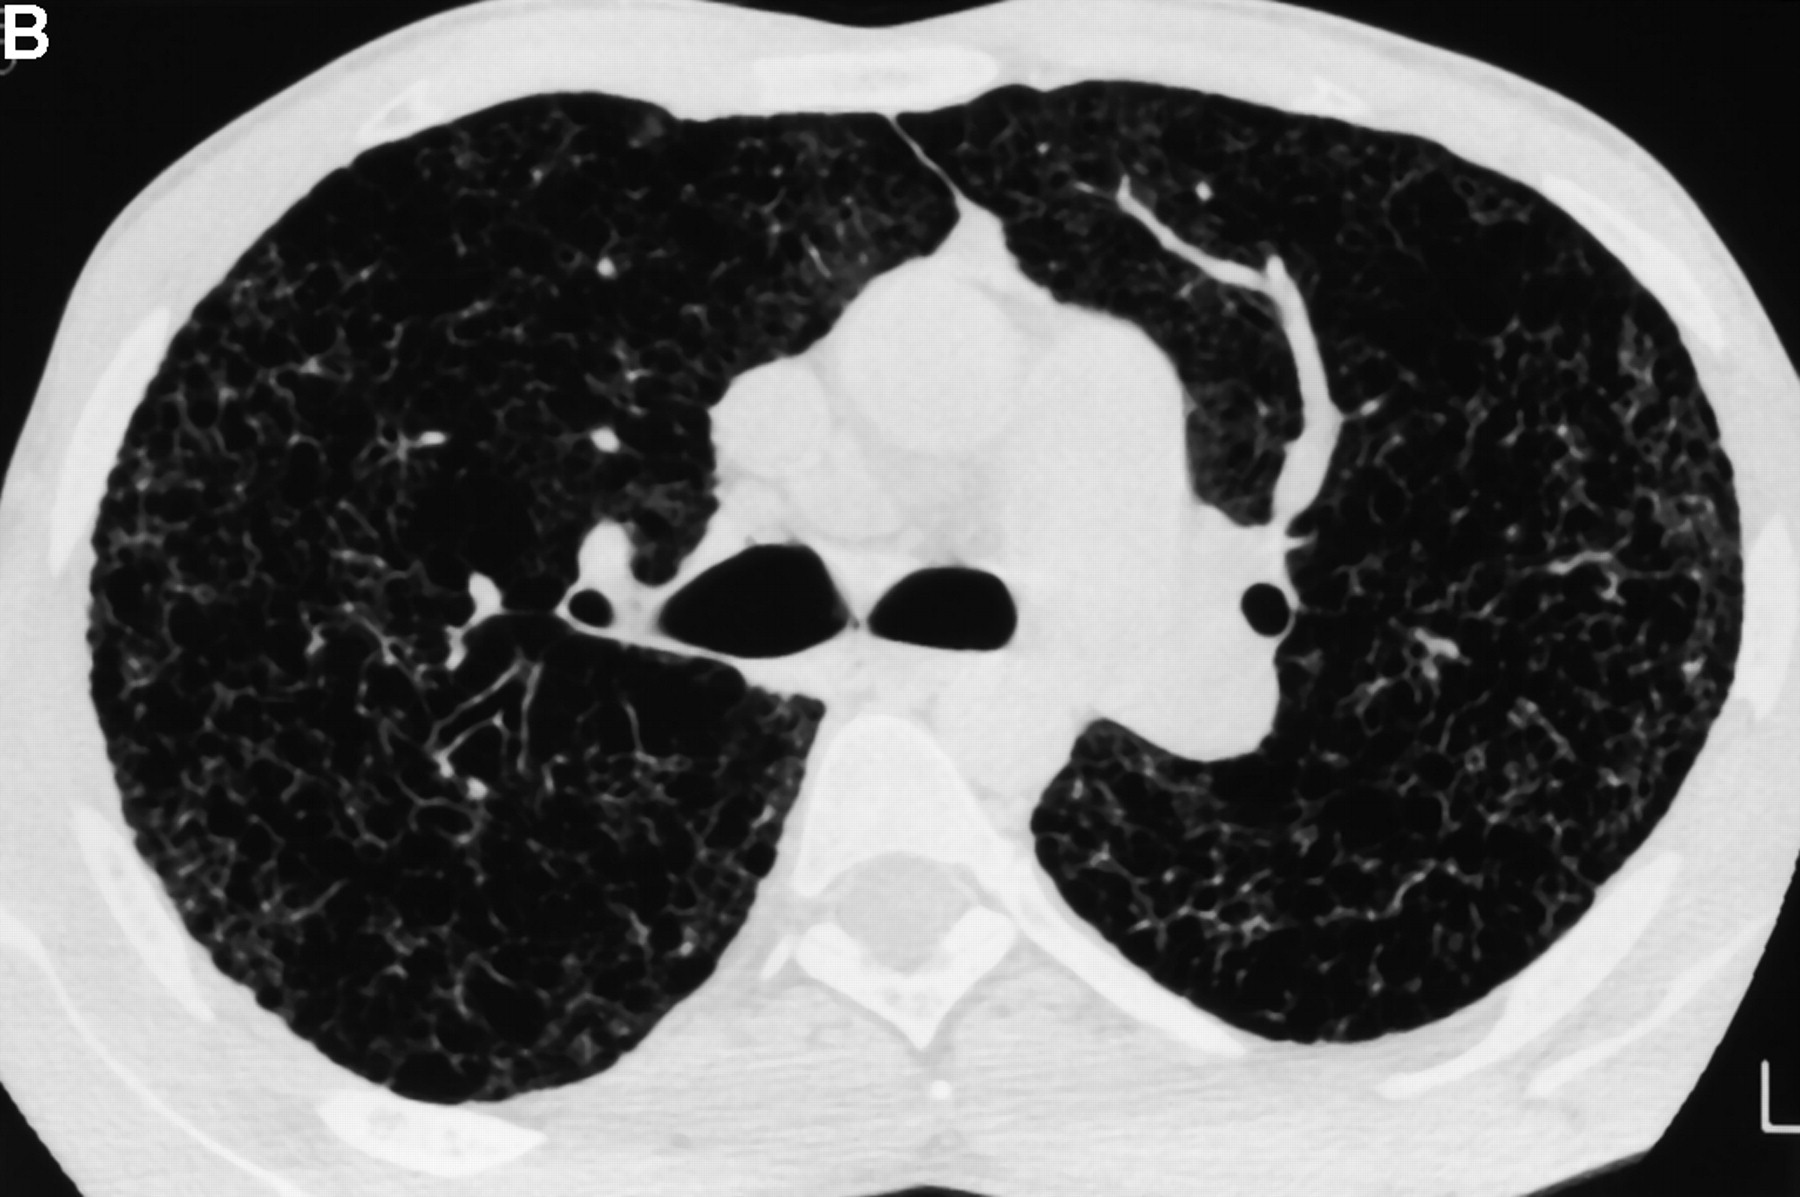 CT-scan for a patient with advanced histiocytosis X associated with severe pulmonary hypertension.